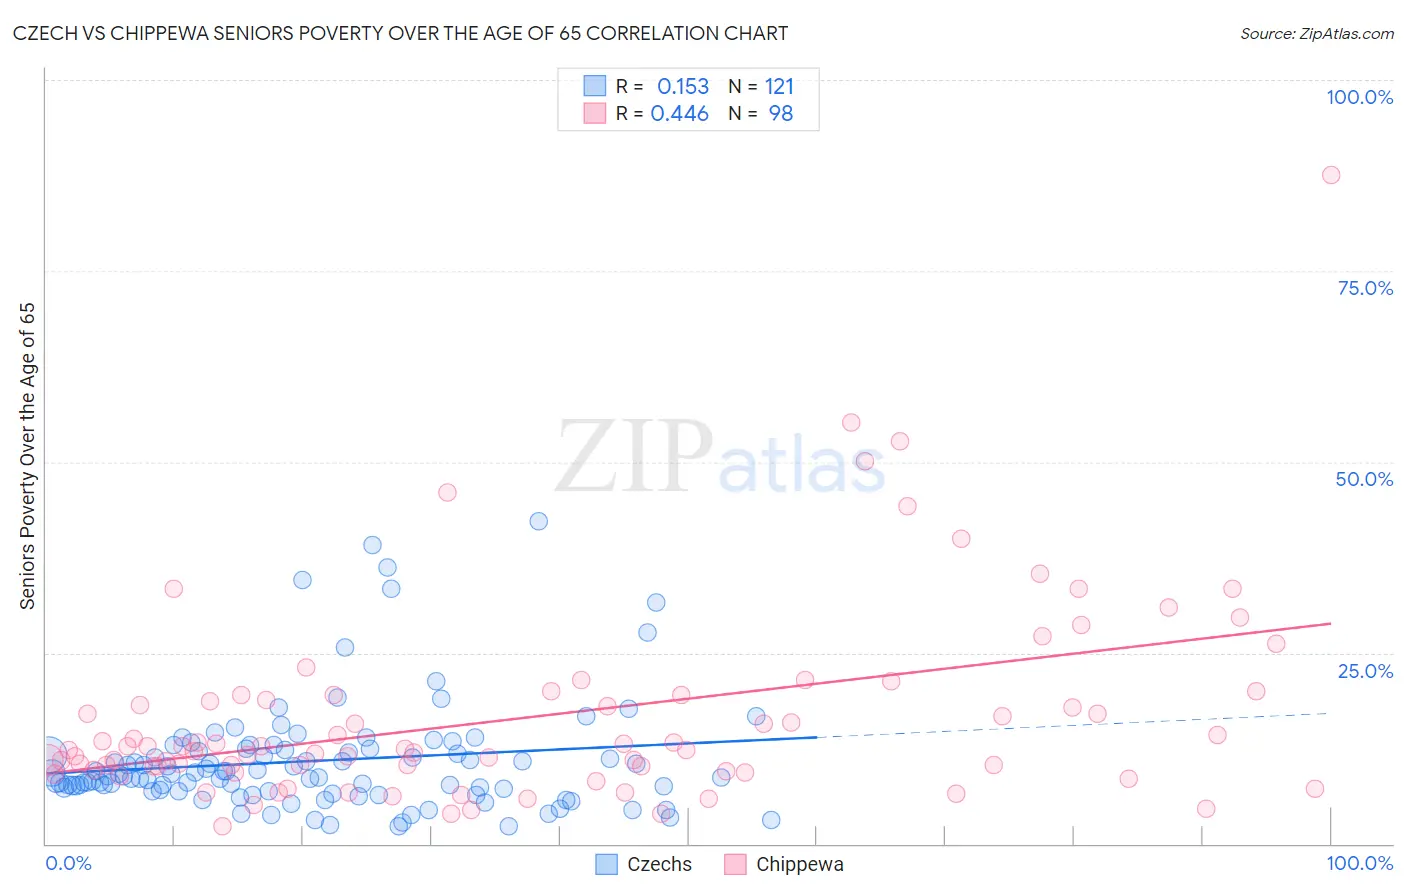 Czech vs Chippewa Seniors Poverty Over the Age of 65